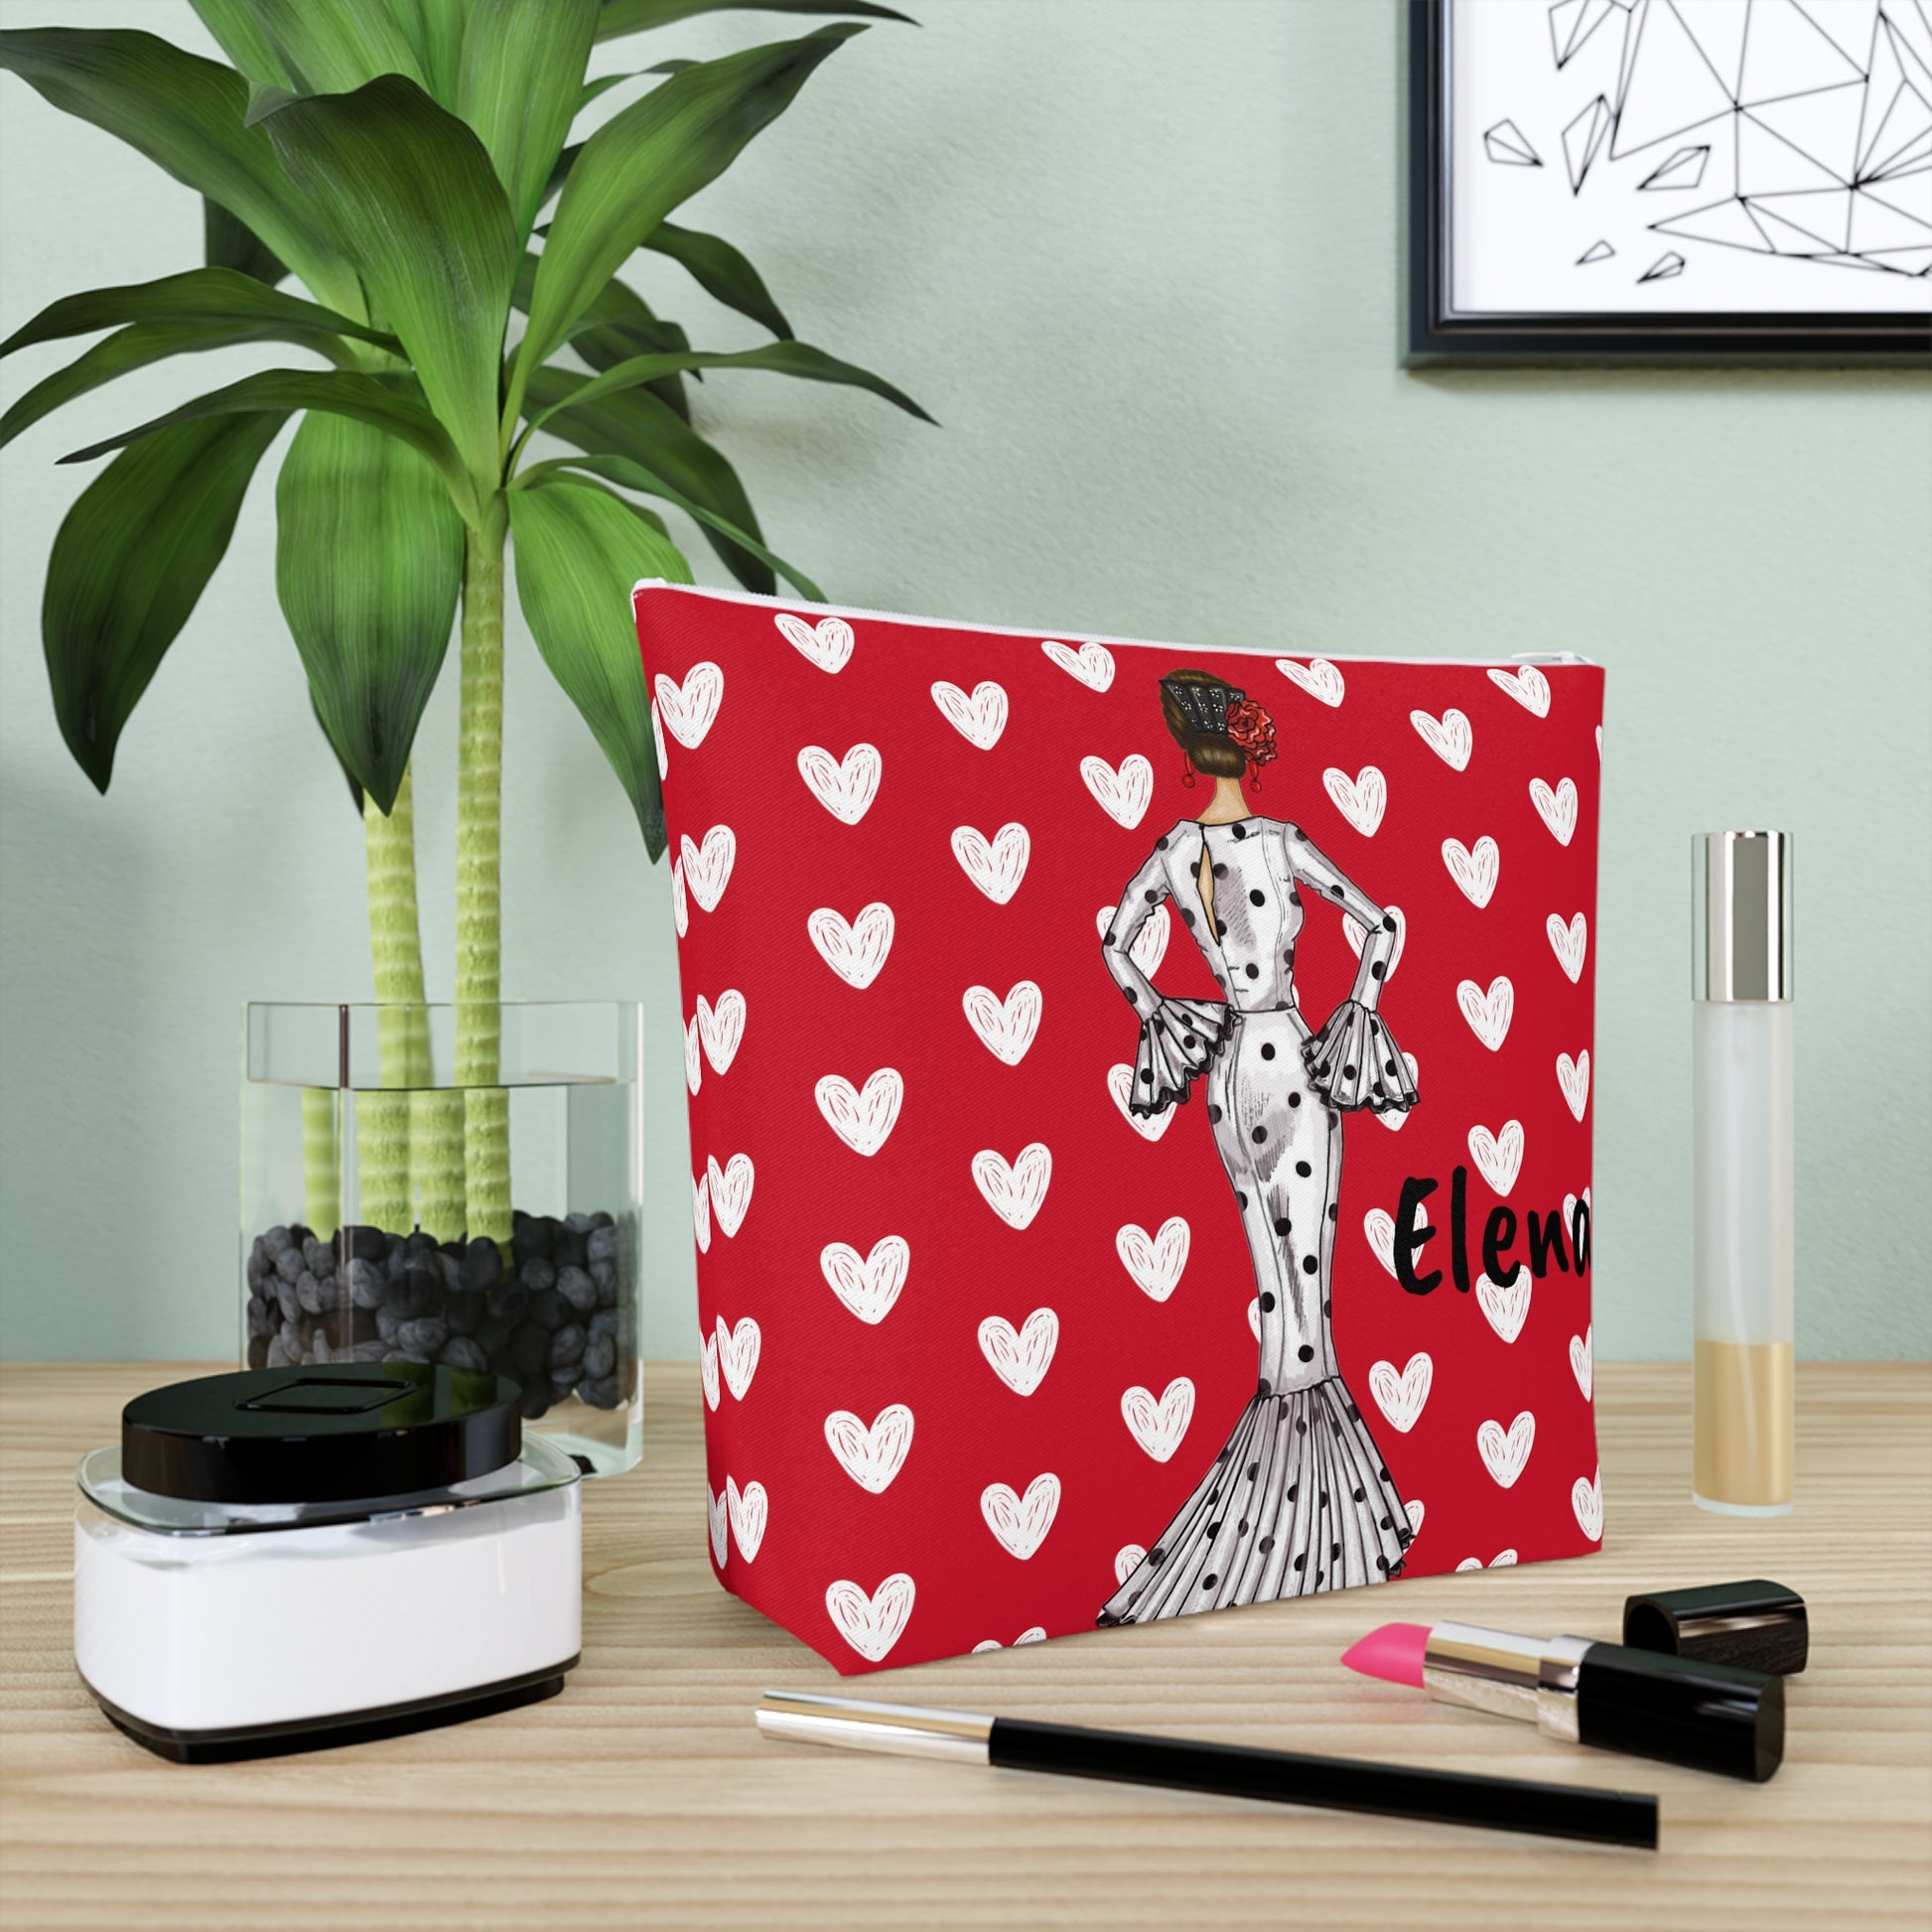 a picture of a dalmatian dog on a red background with hearts